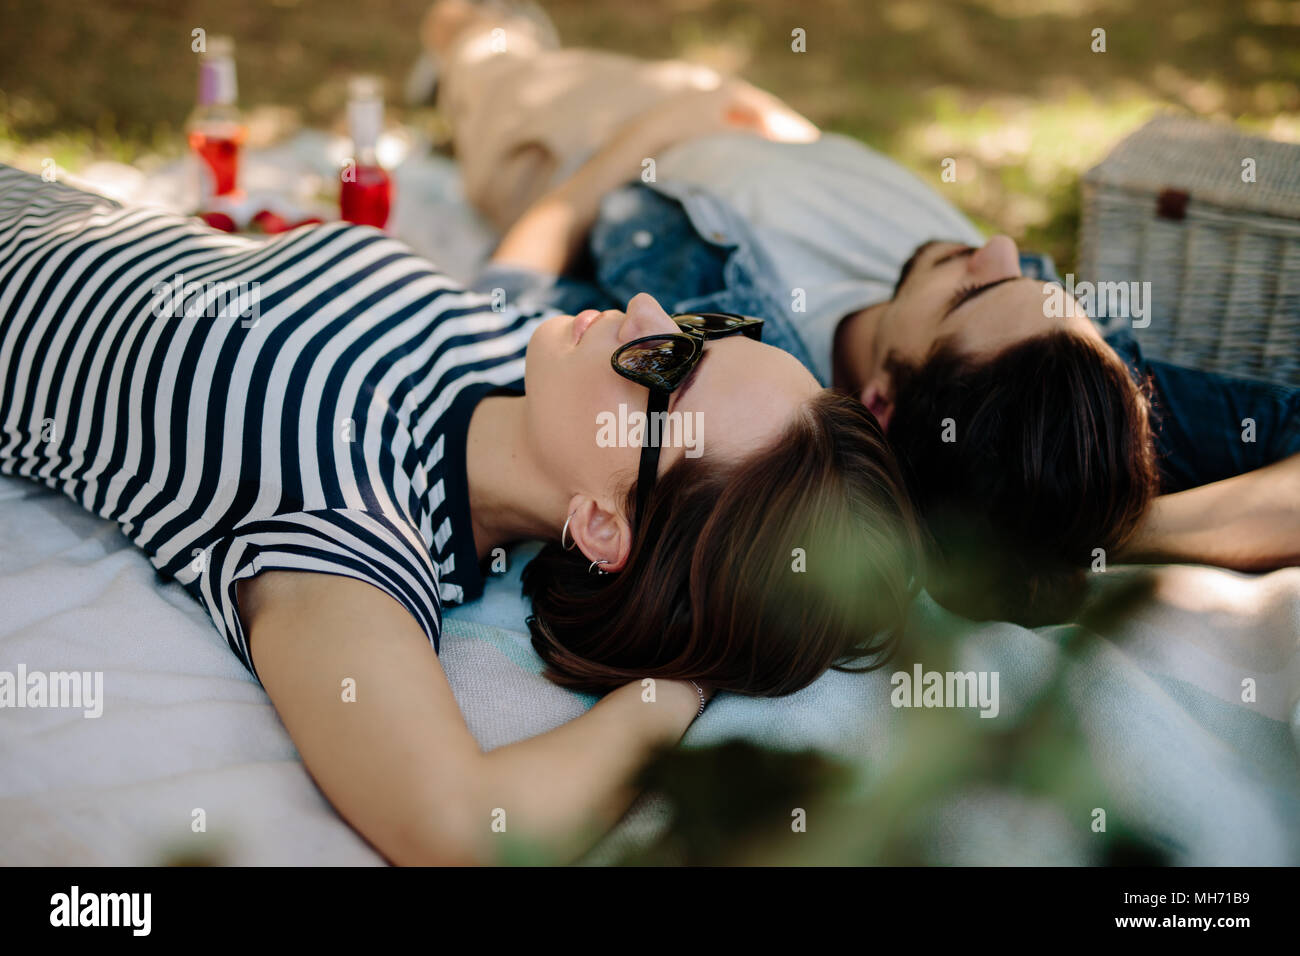 Beautiful woman wearing sunglasses lying down on a blanket with her boyfriend. Couple relaxing at a park during picnic. Stock Photo